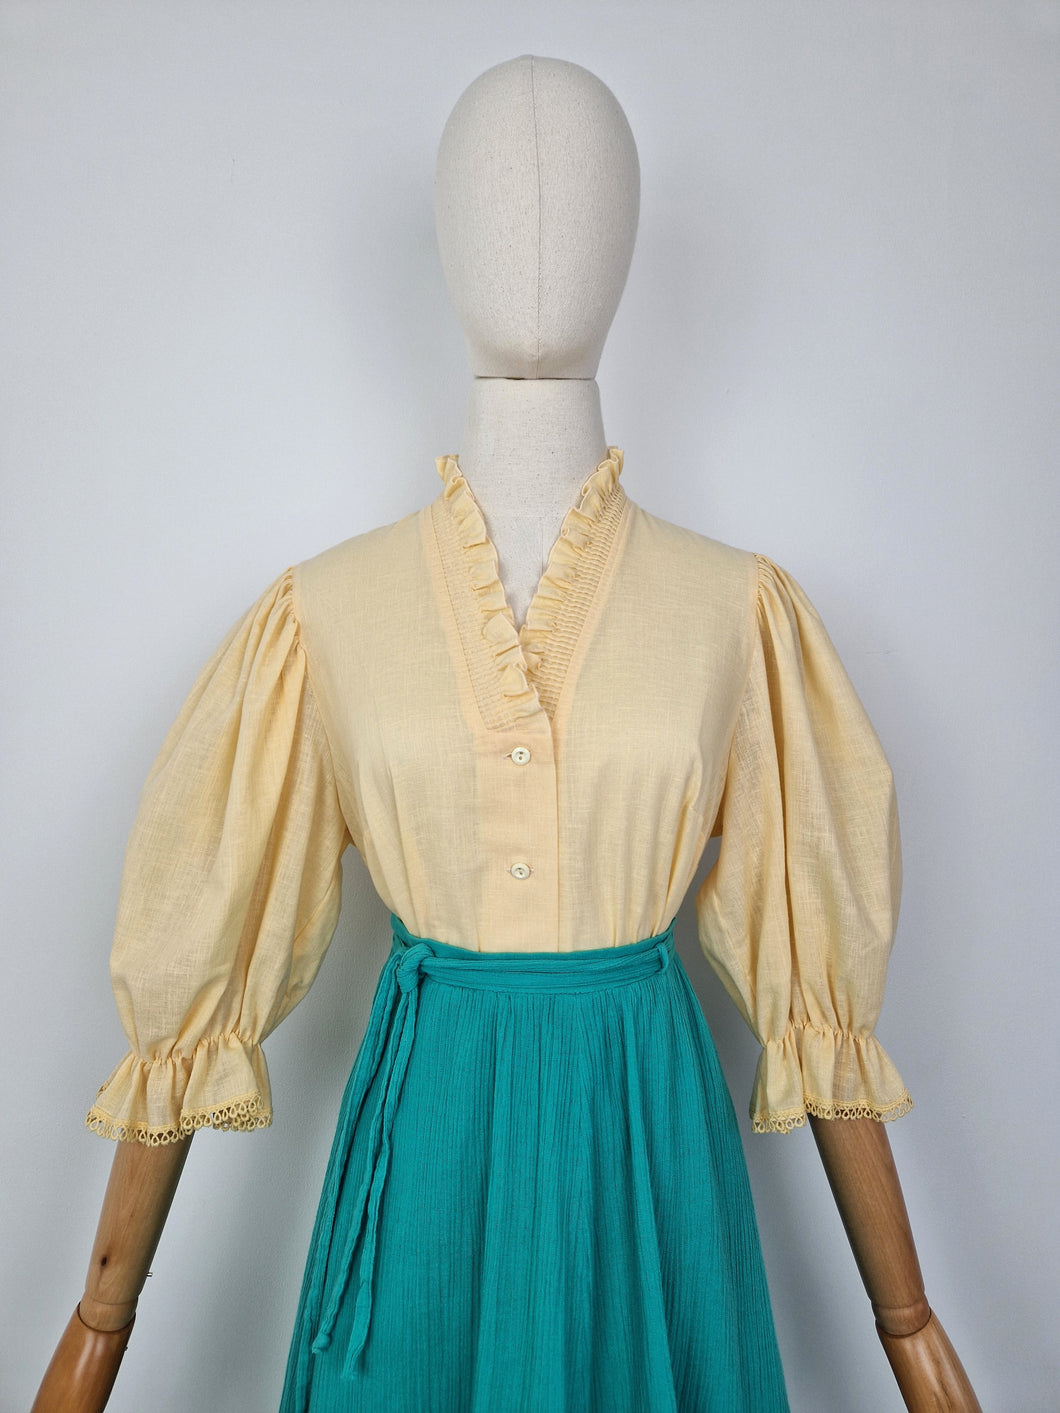 Vintage canary yellow puff sleeves blouse